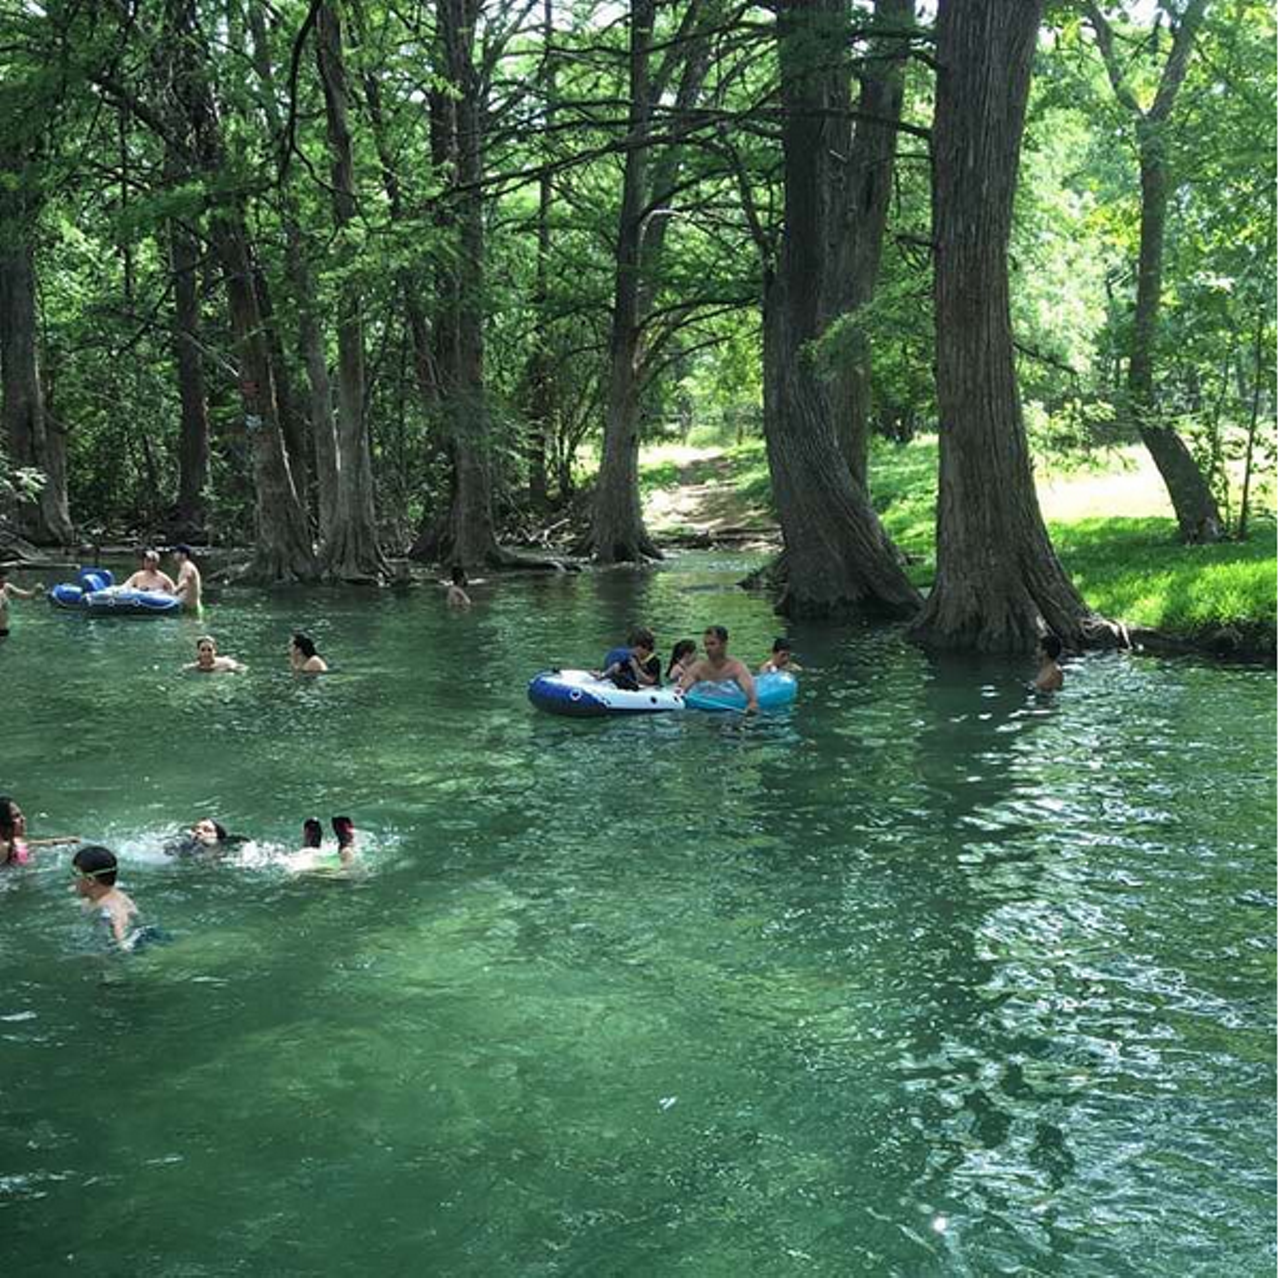 Blue Hole
100 Blue Hole Lane, WimberleyOnly an hour drive from Central San Antonio, Blue Hole offers Texans a natural swimming spot complete with beautiful flora and fauna and even a rope swing. Just don't let go of that rope swing too early, or things might get ugly. 
Instagram/beccleigh